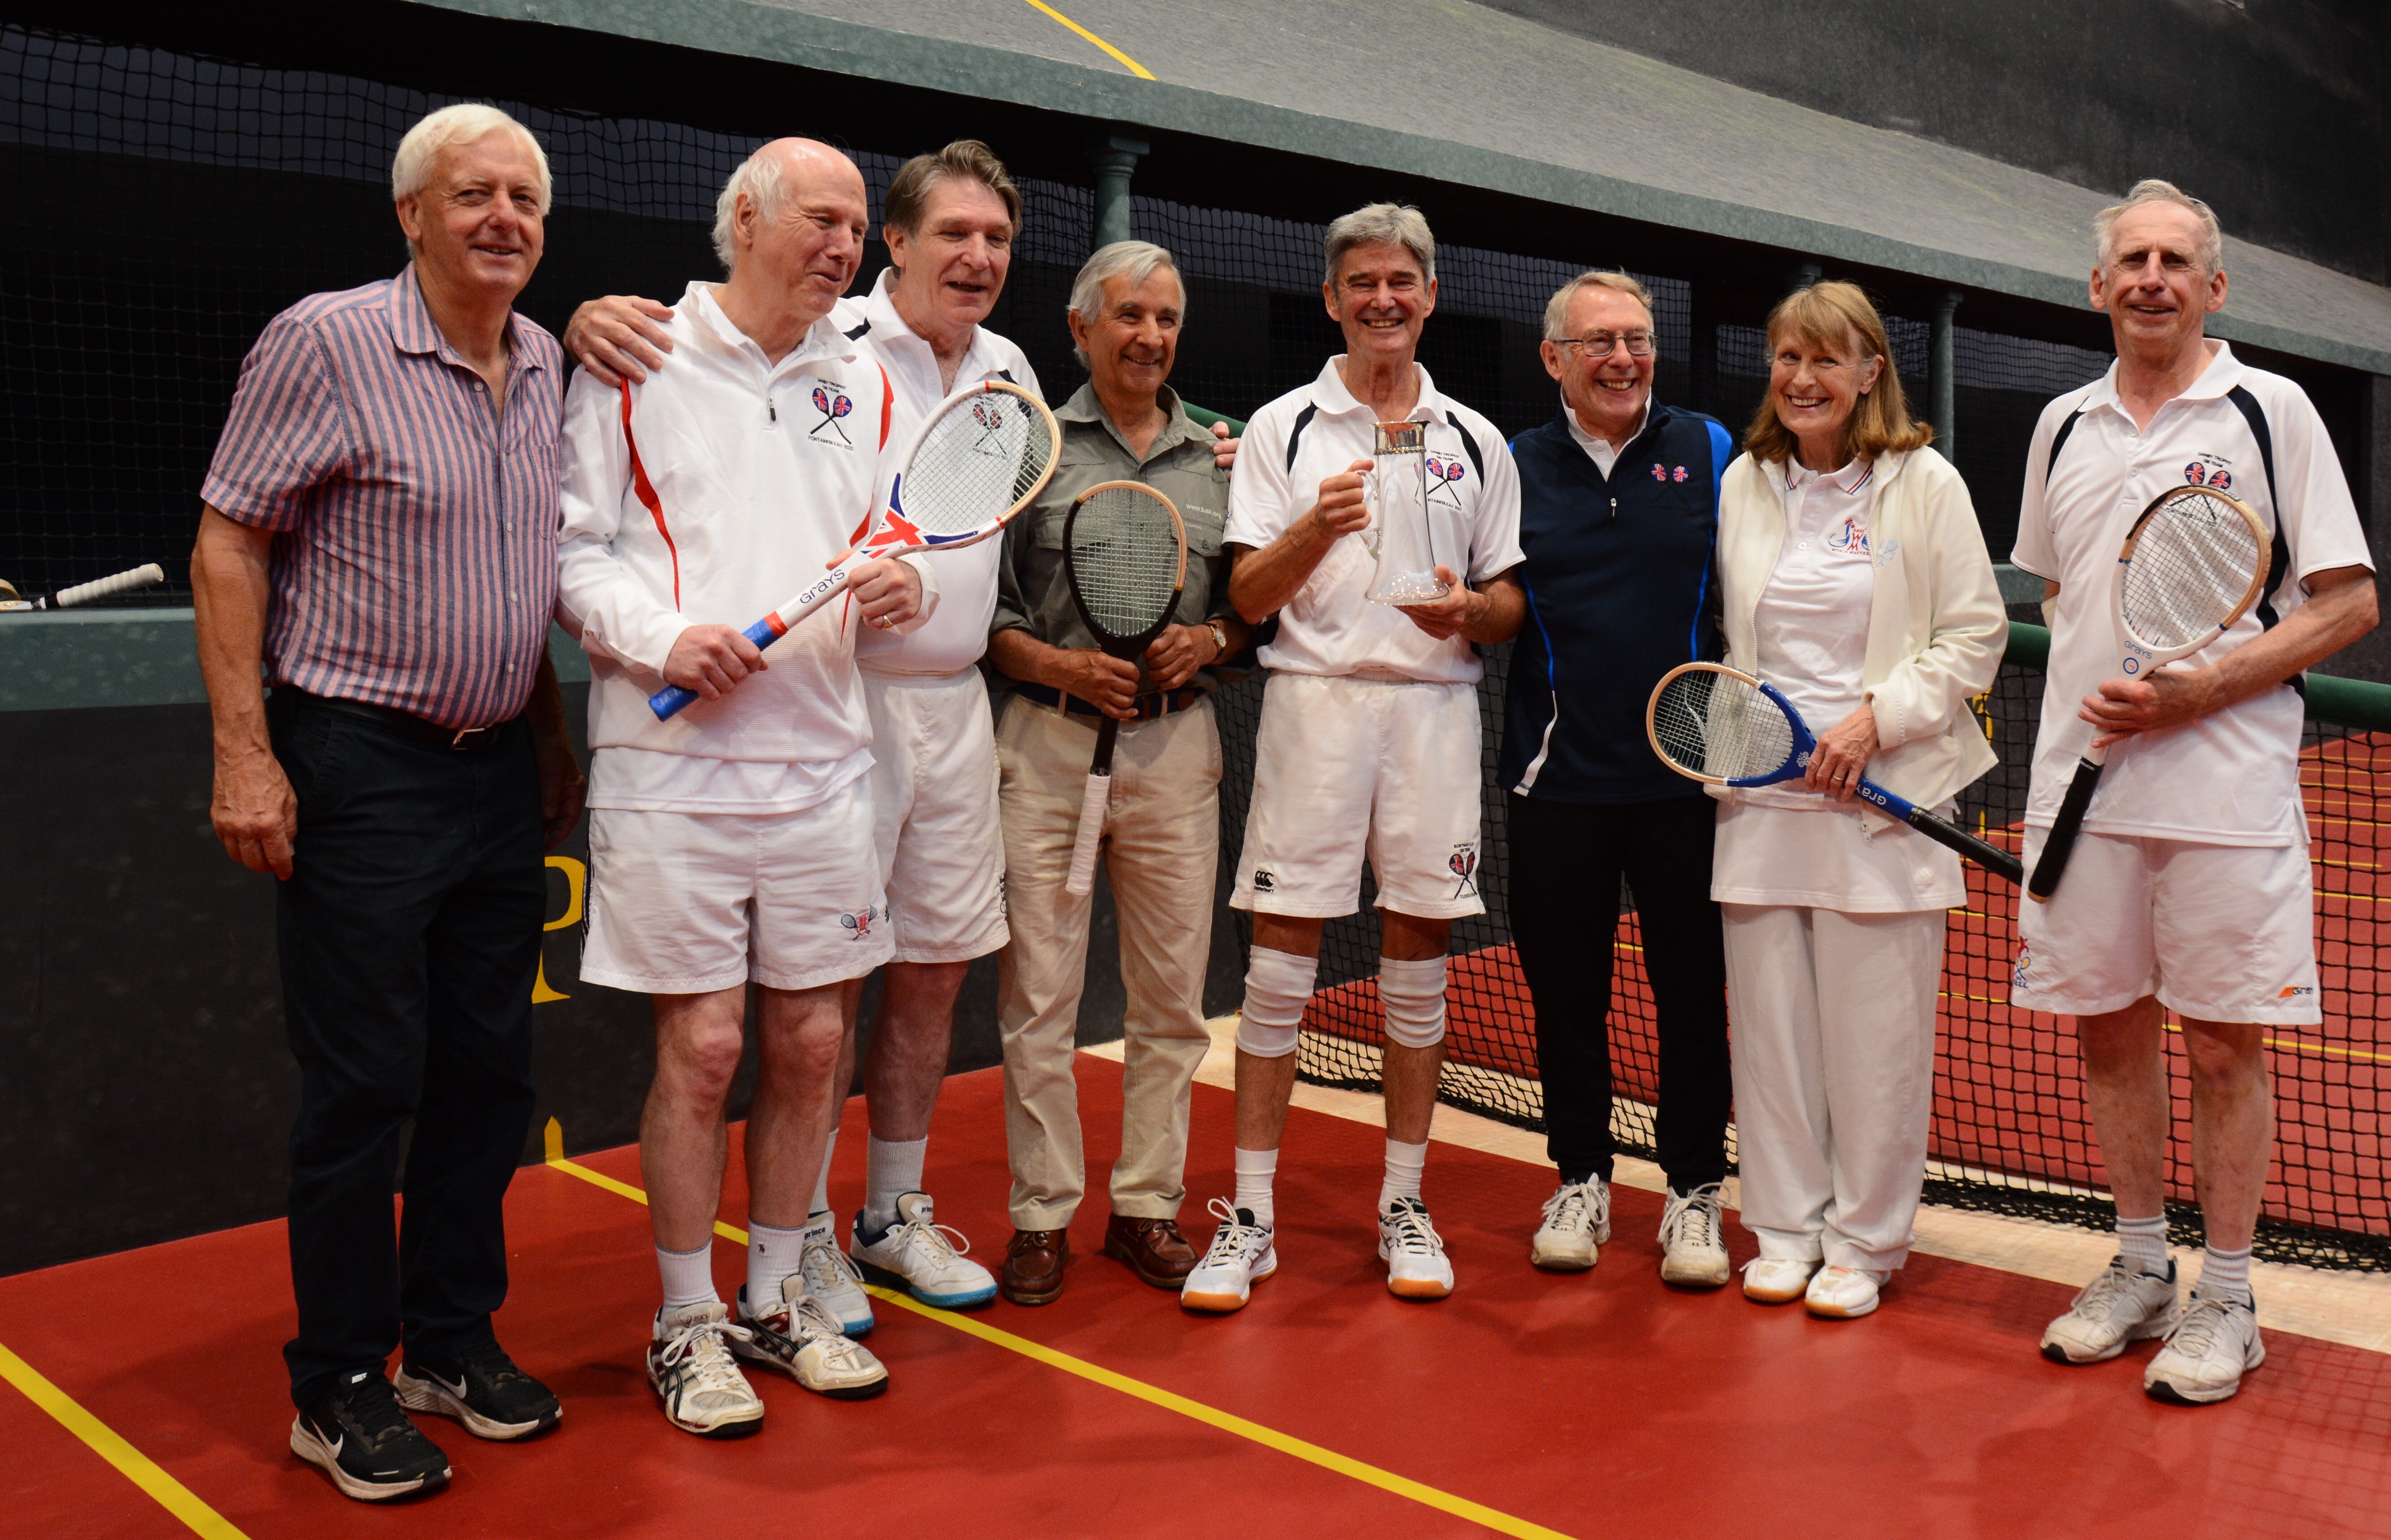 Real Tennis World Masters 2022 Update